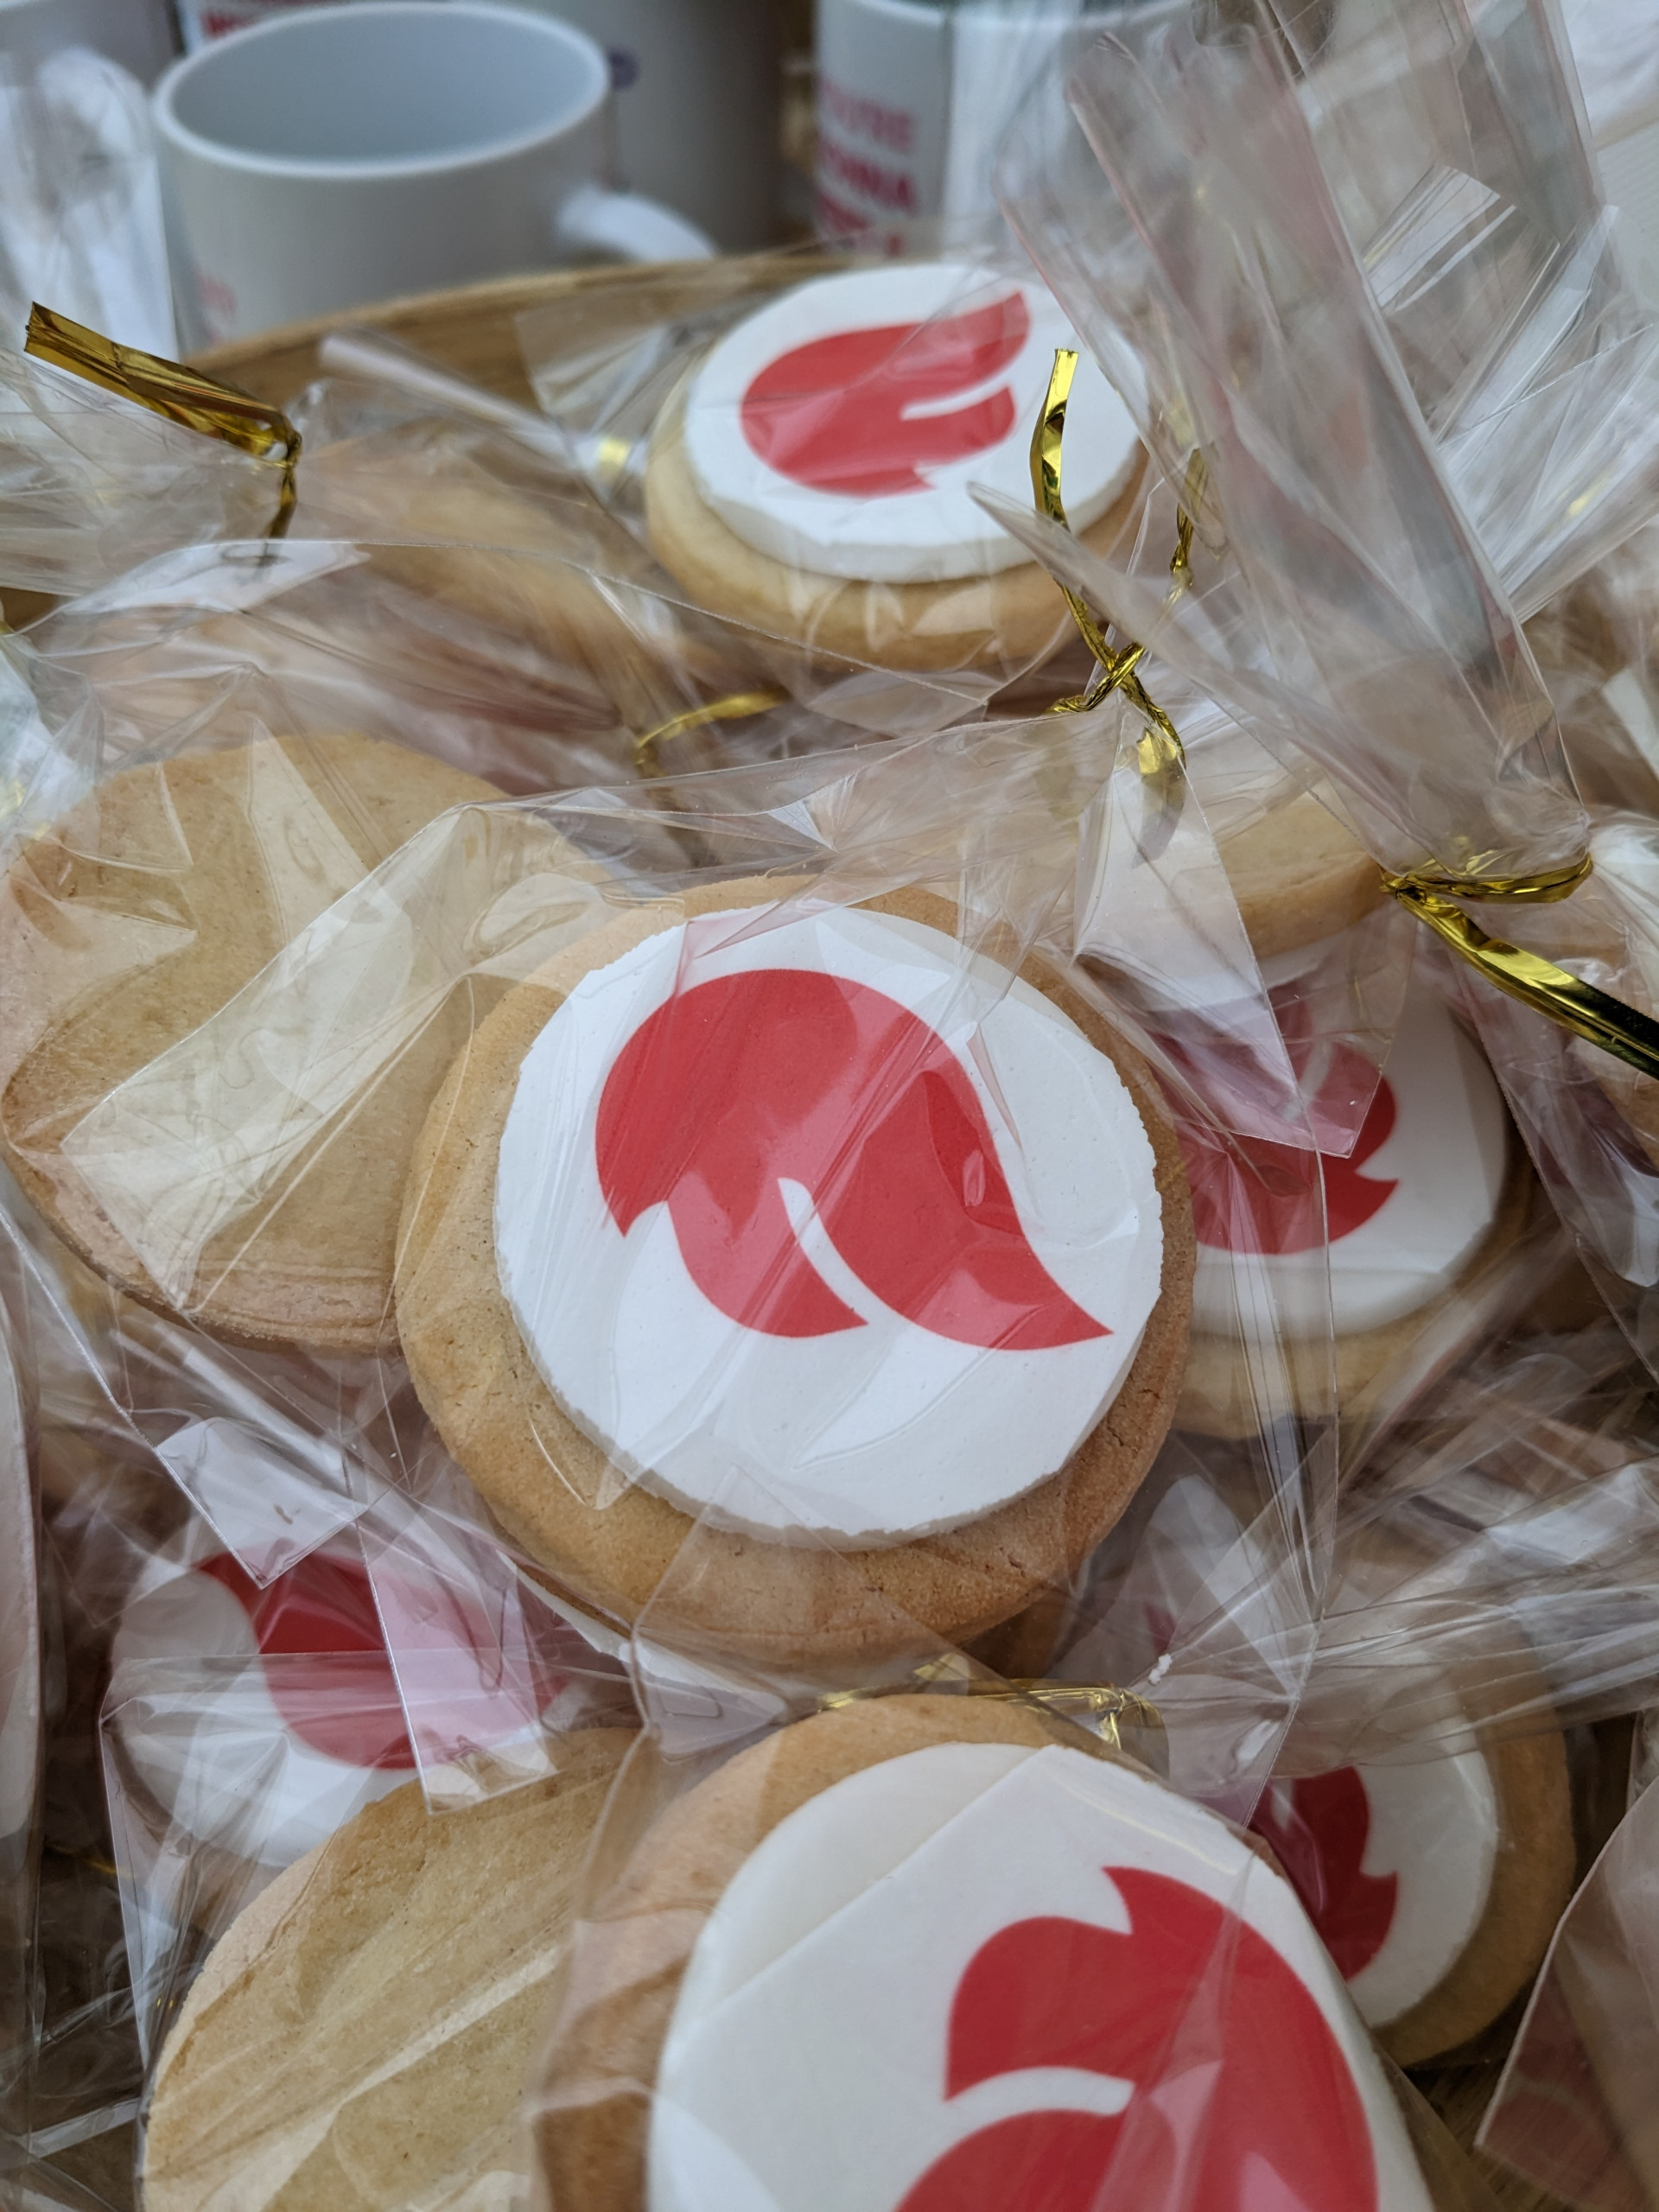 Cookies branded with the This is Fever logo